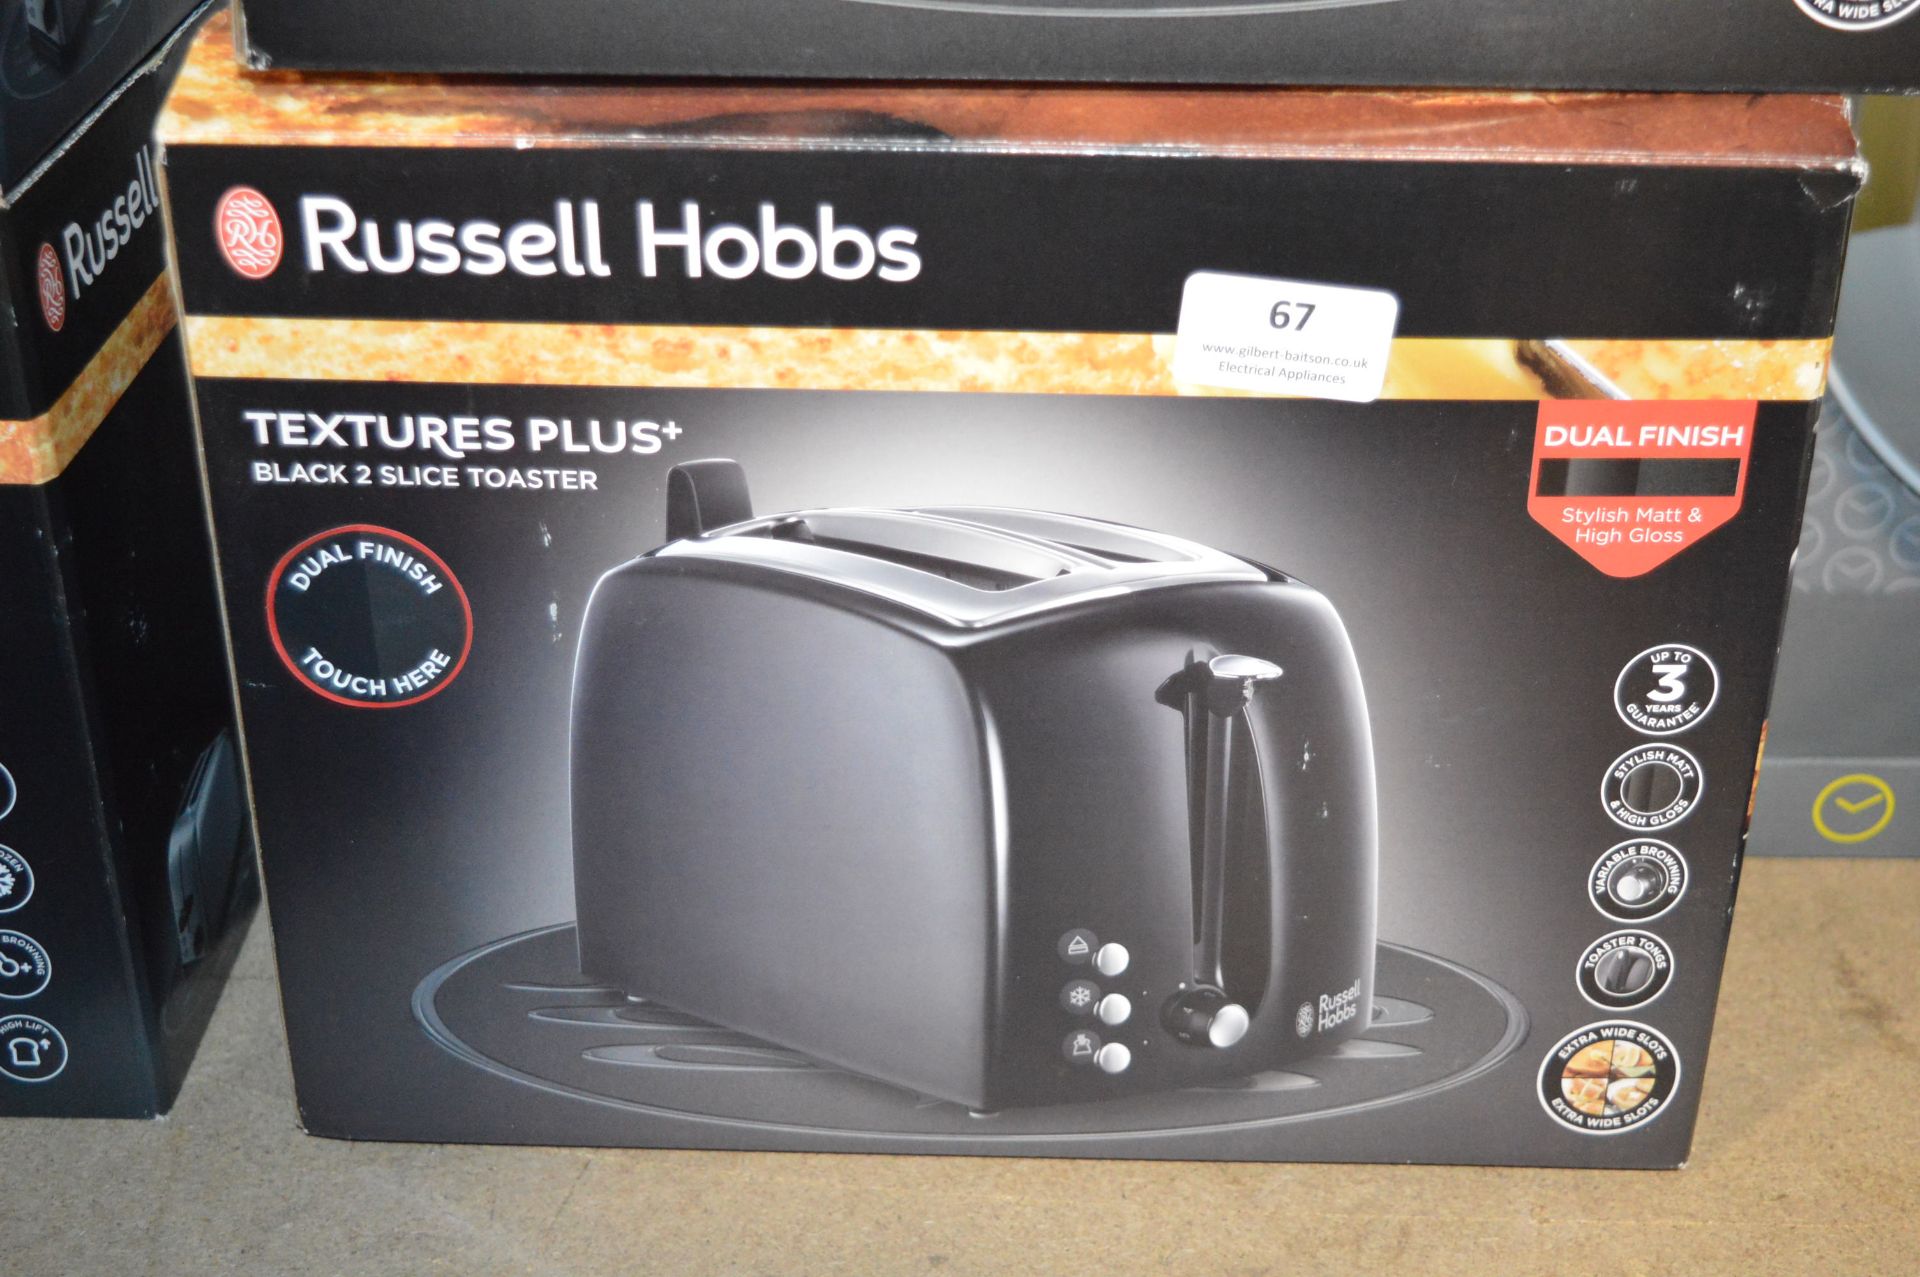 *Russell Hobbs Textures Plus+ Two Slice Toaster